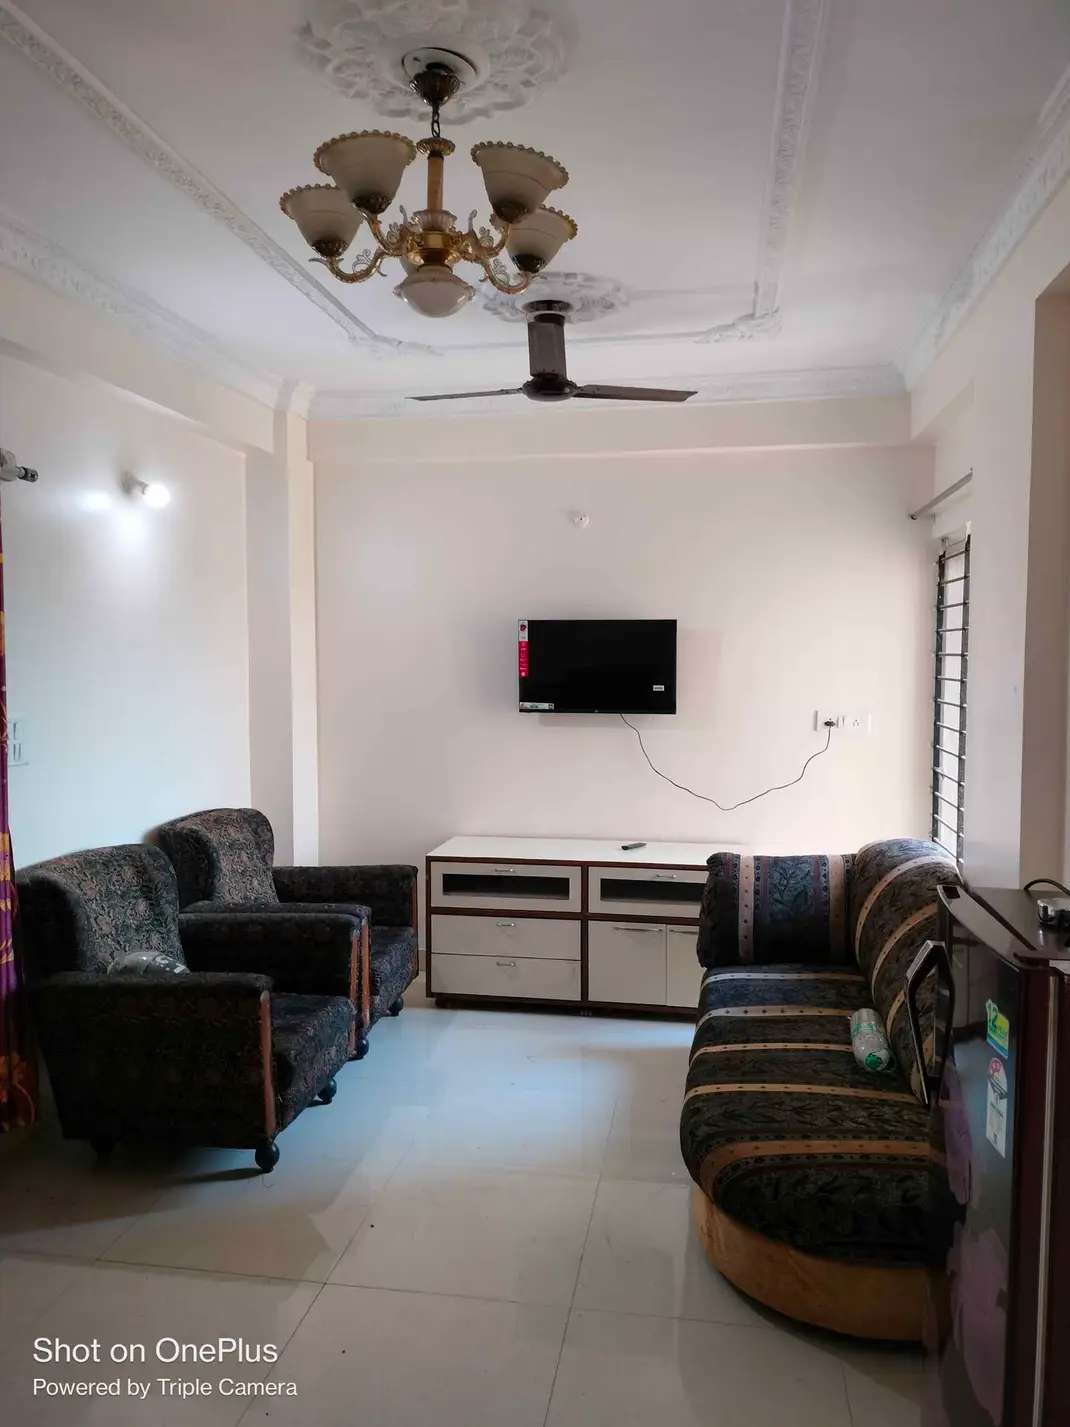 2 Bed/ 2 Bath Rent House/ Bungalow/ Villa, Furnished for rent @Ayodhya bypass road Bhopal 